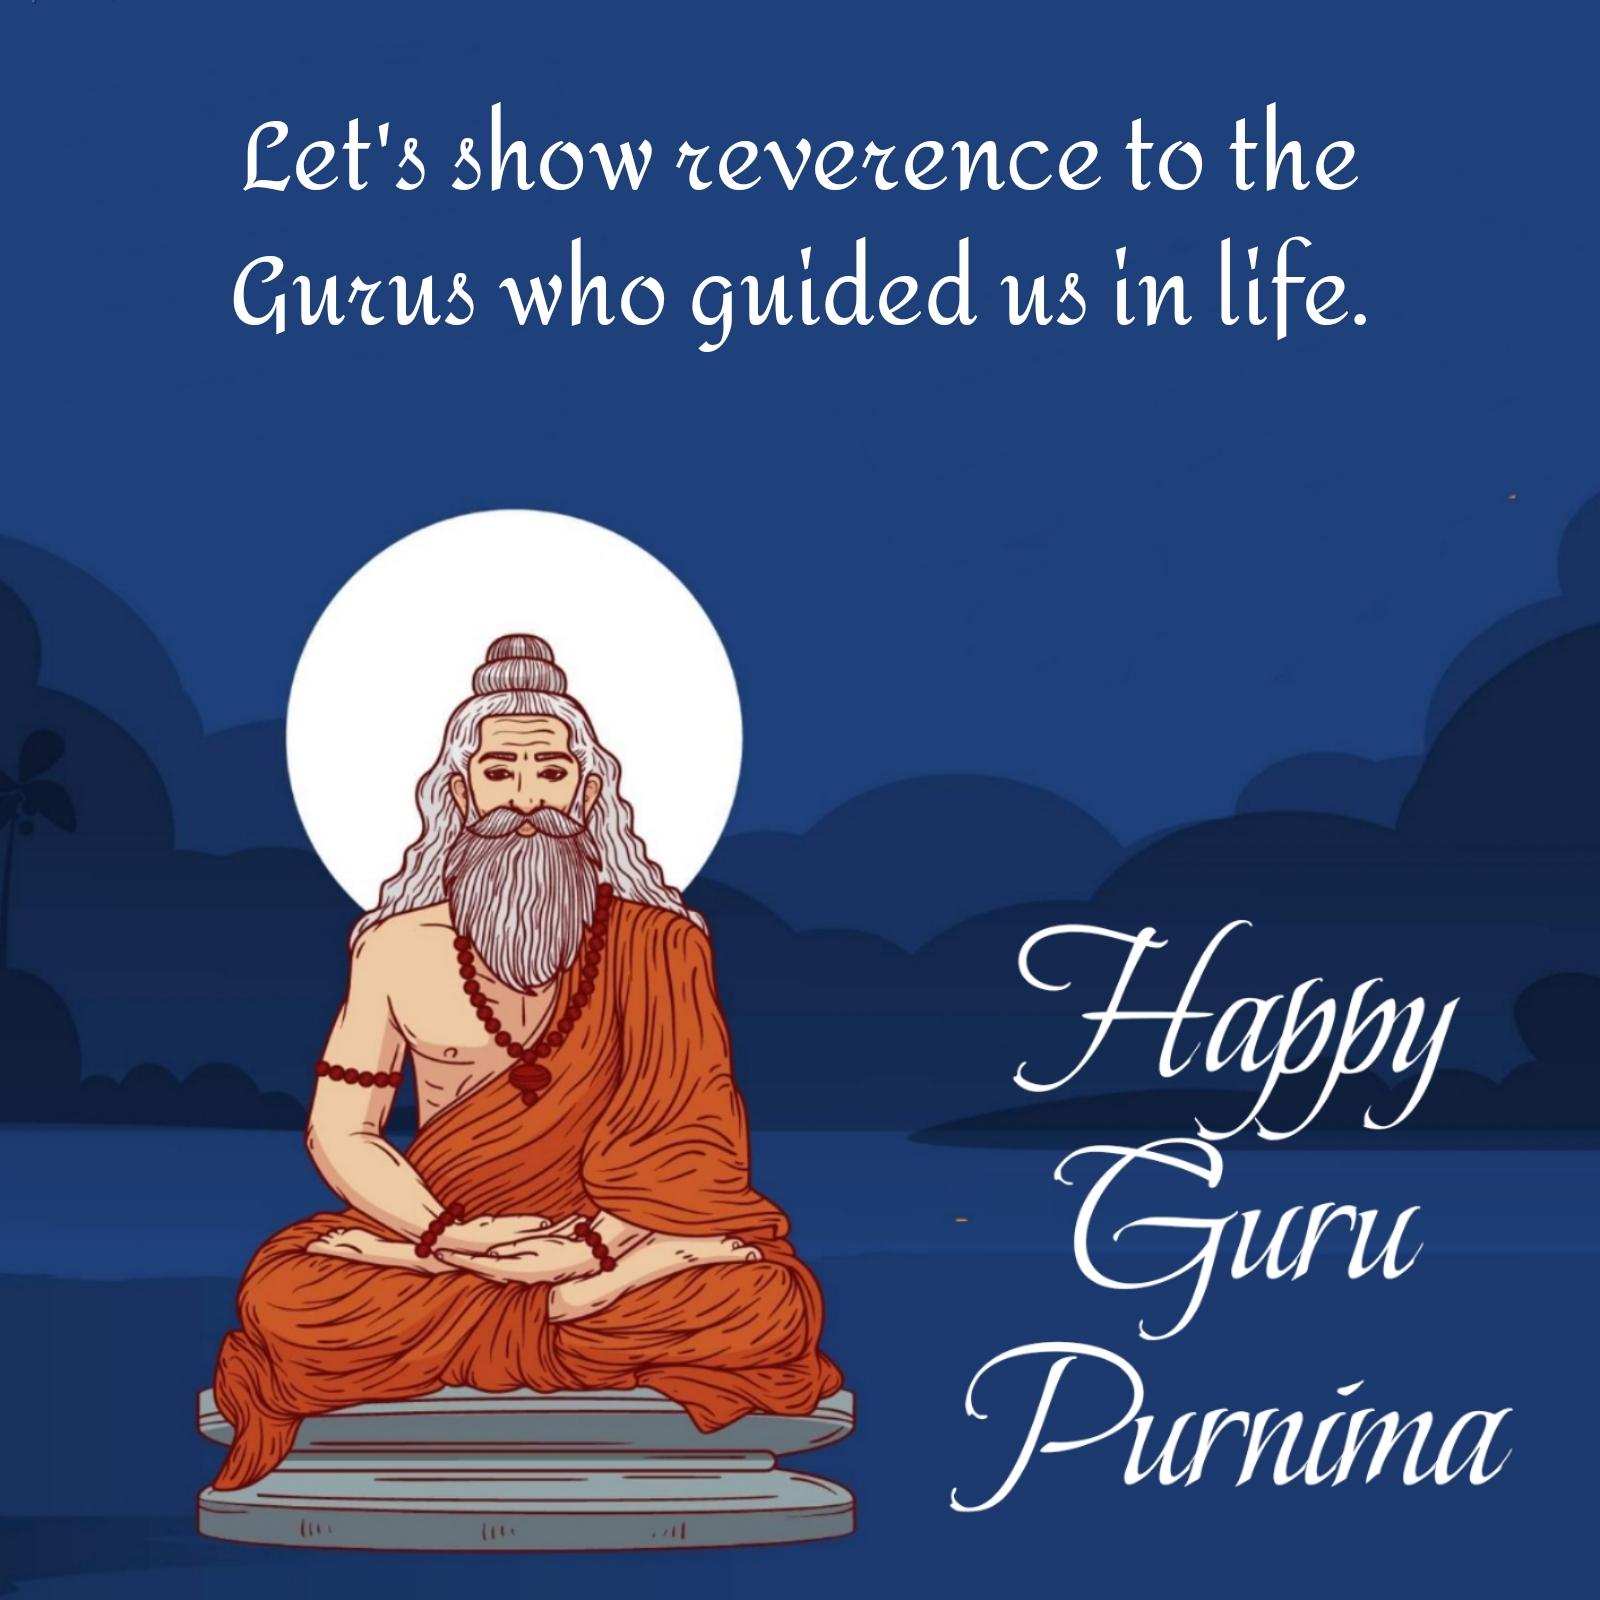 Let's show reverence to the Gurus who guided us in life